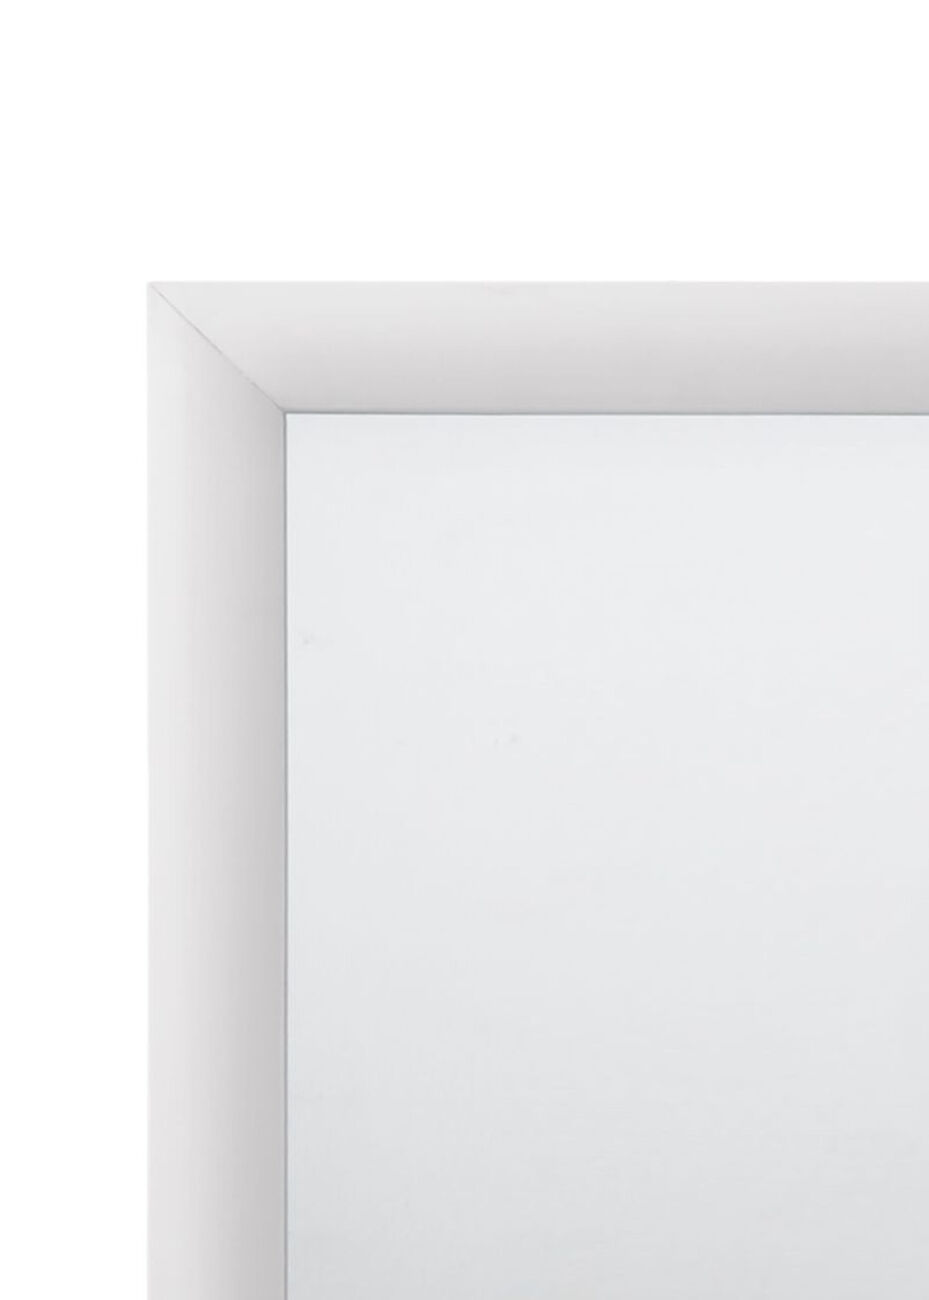 Wooden Framed Mirror with Rectangular Shape, Silver and White